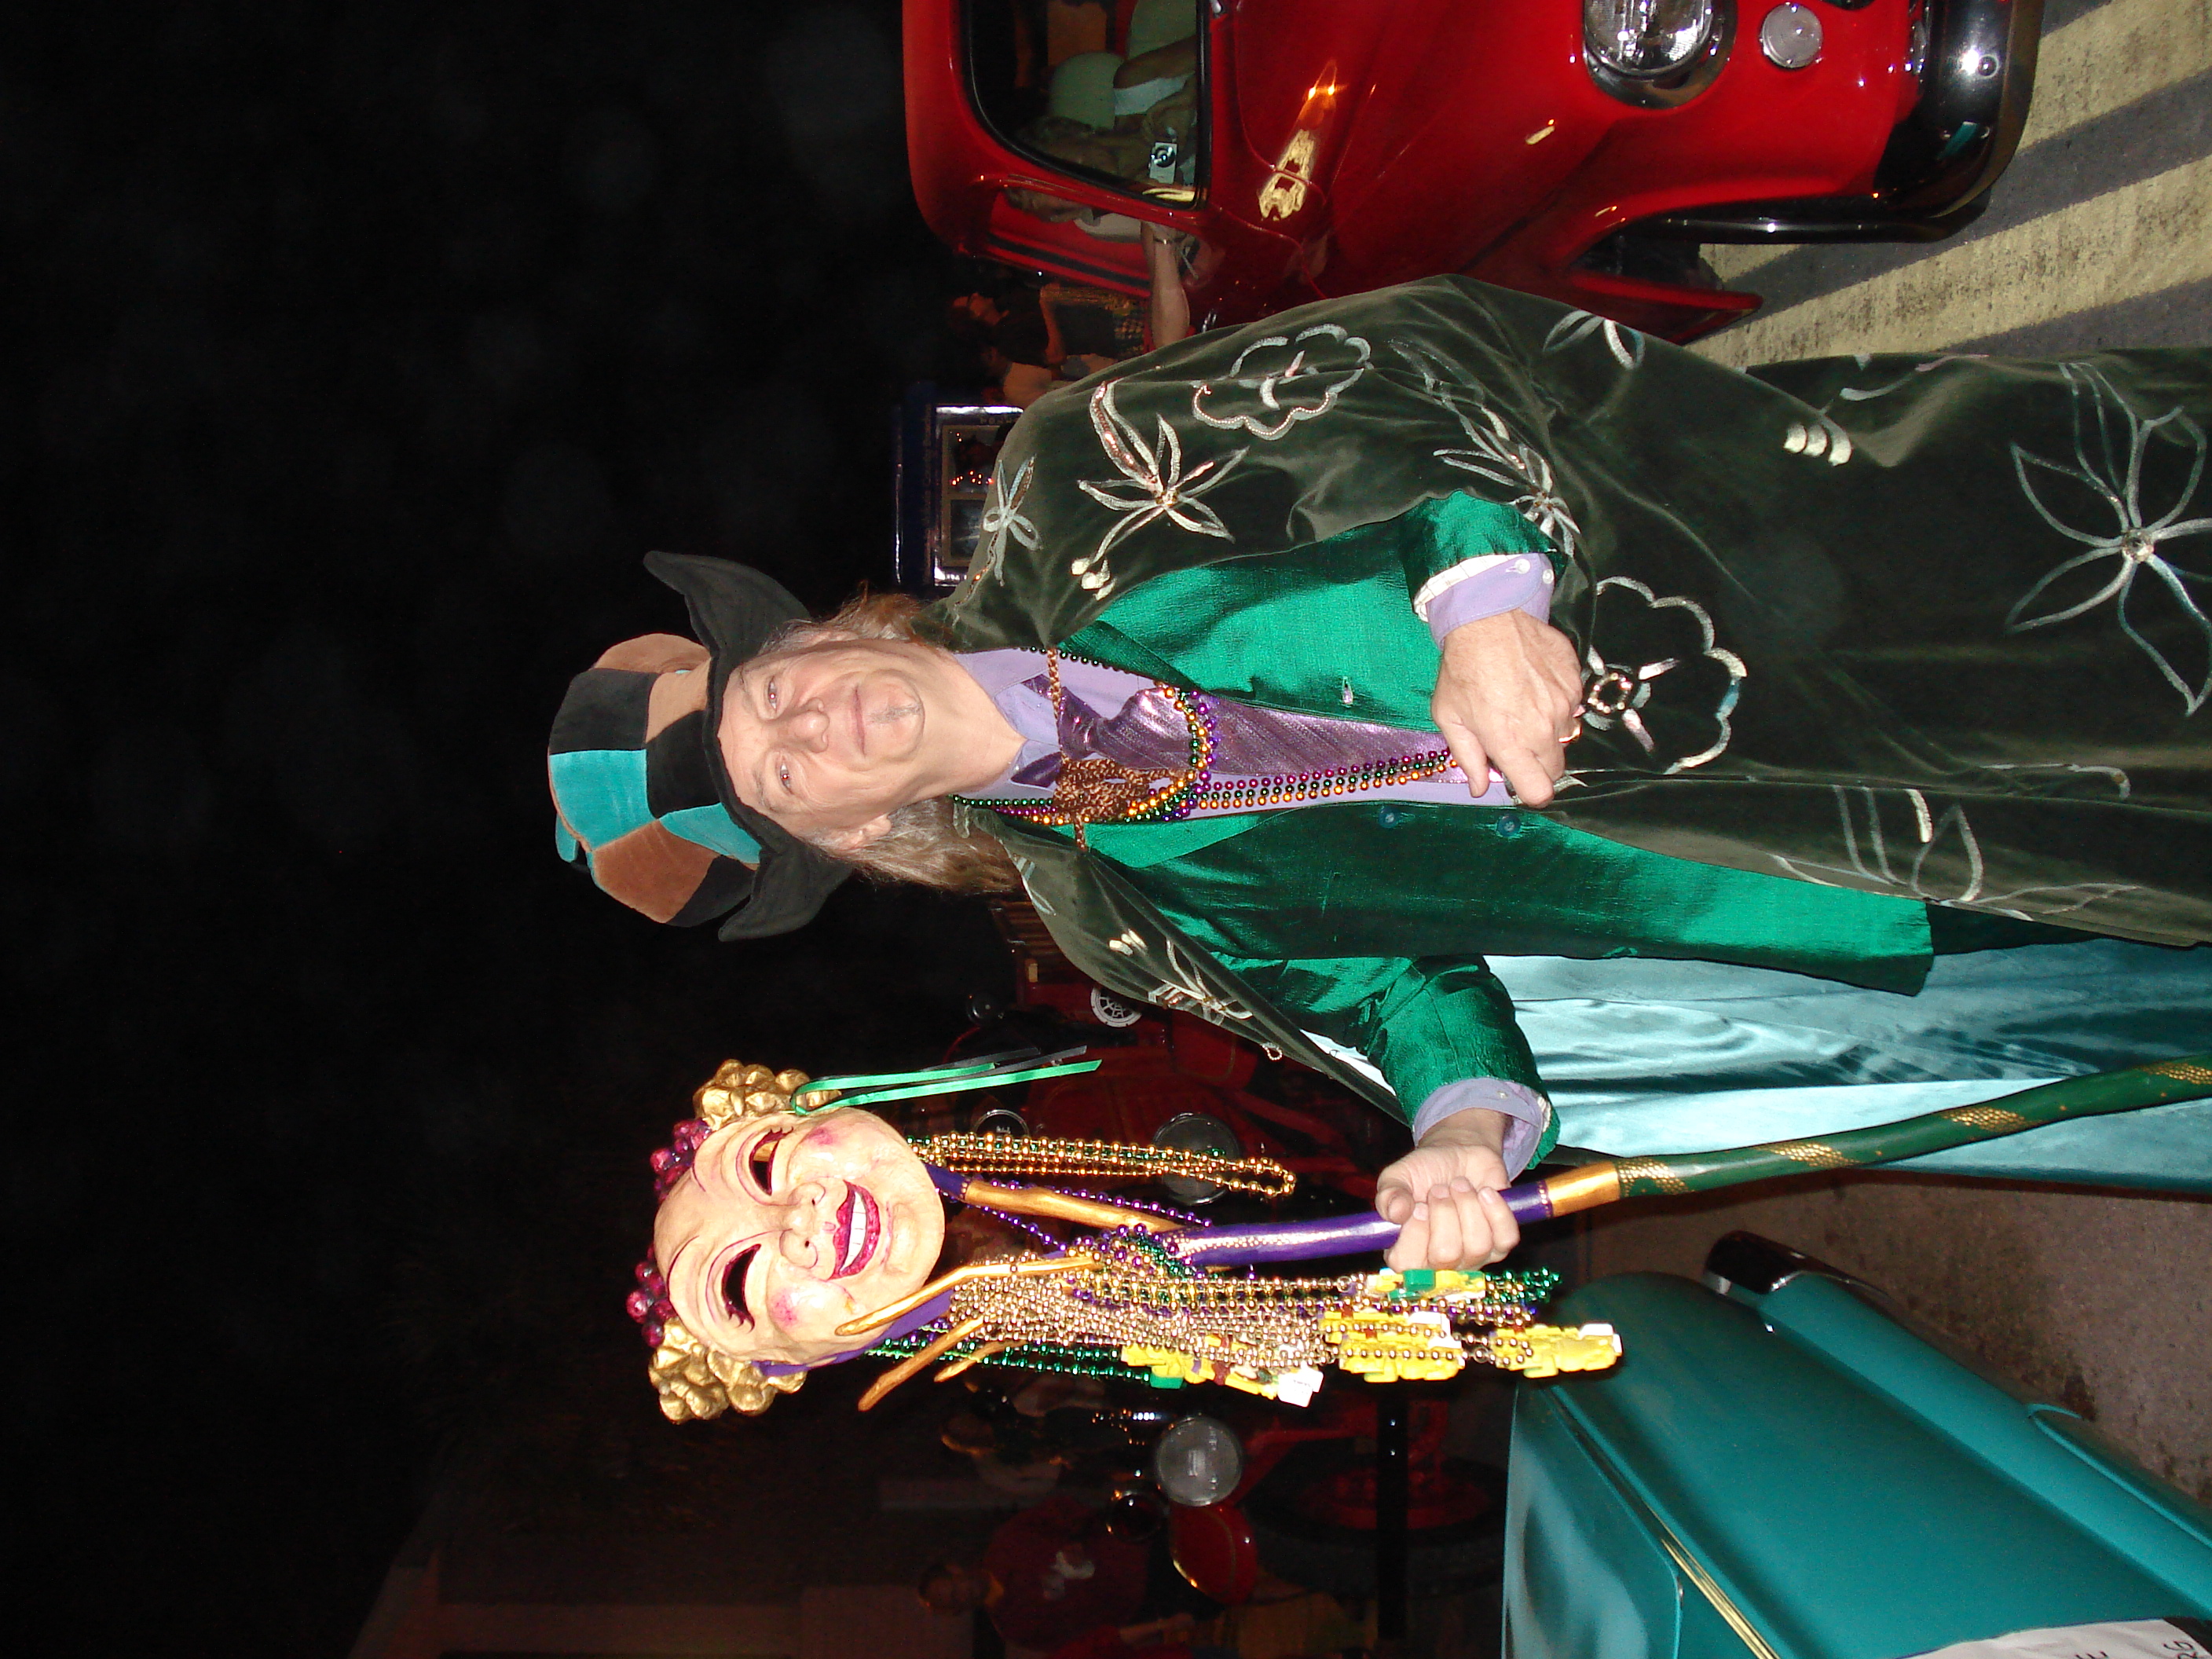 John - ready to lead the first Mardi Gras Parade (with Adele - not in this photo) in 2008. Wonderful person, great artist and musician. He will be missed.